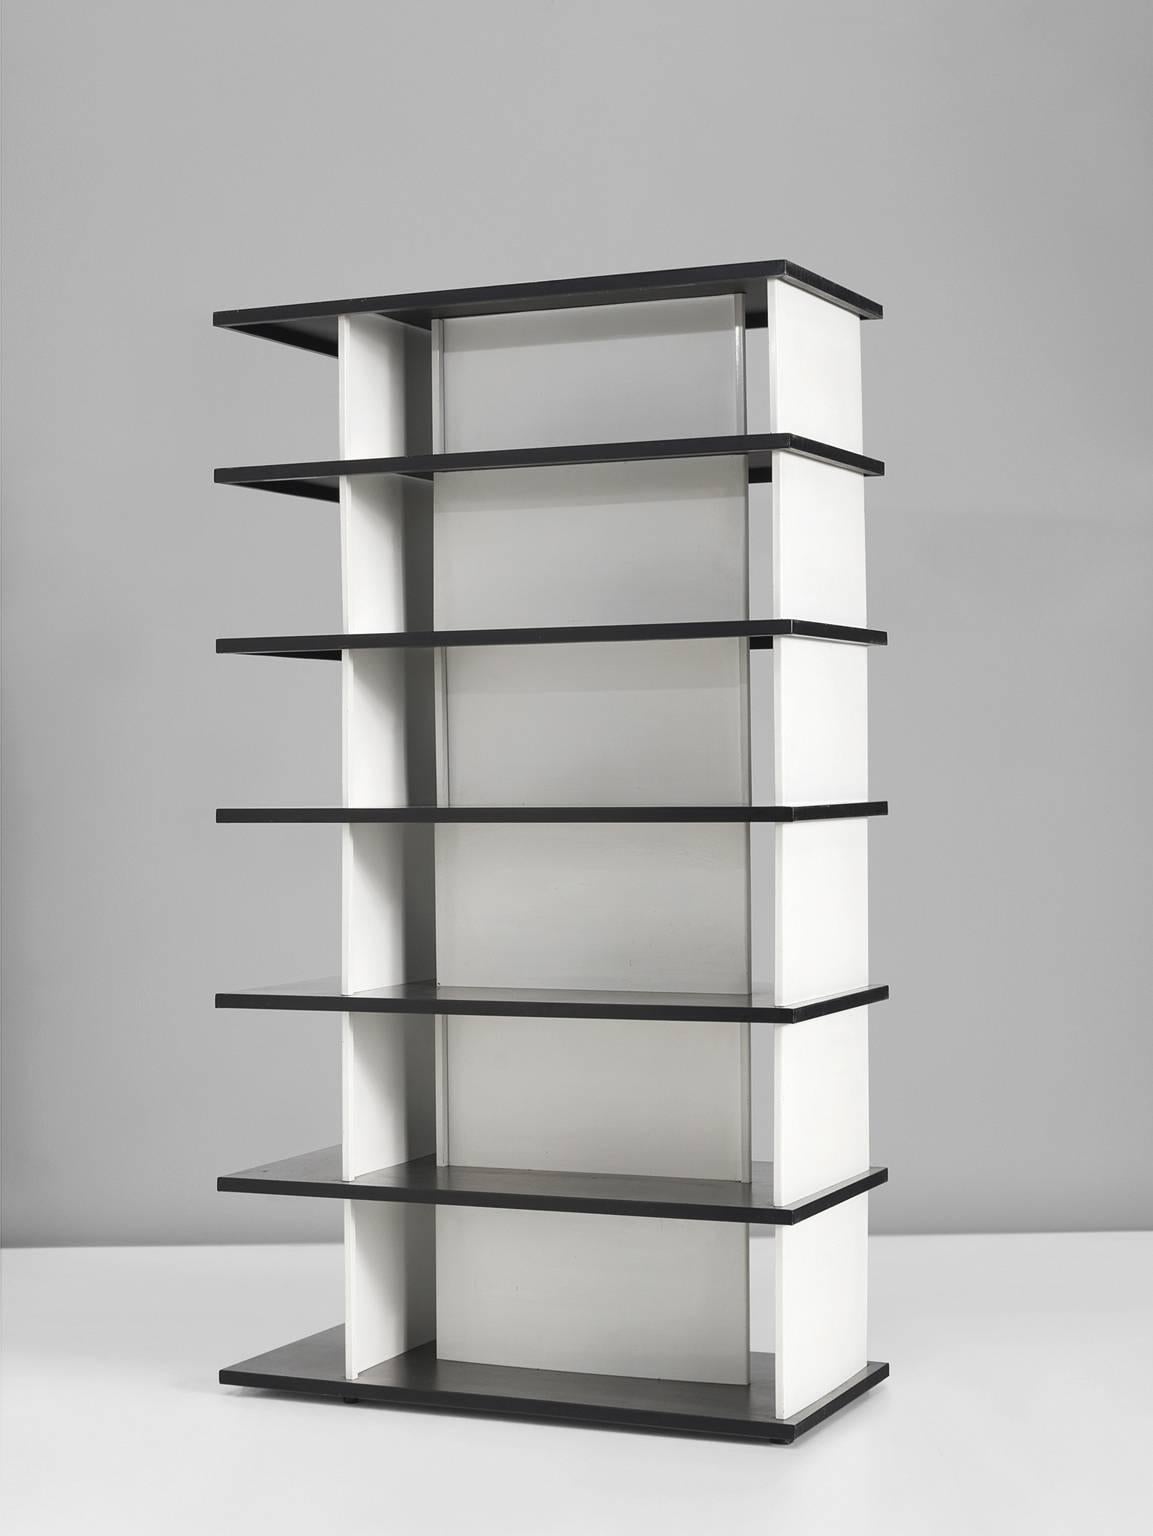 Wim Rietveld, bookcase, enameled metal,  he Netherlands, 1960.

This self supporting bookcase was originally made for 'De Bijenkorf', a Dutch high end department store in 1960. The piece consists of seven black enameled shelves and can be used on